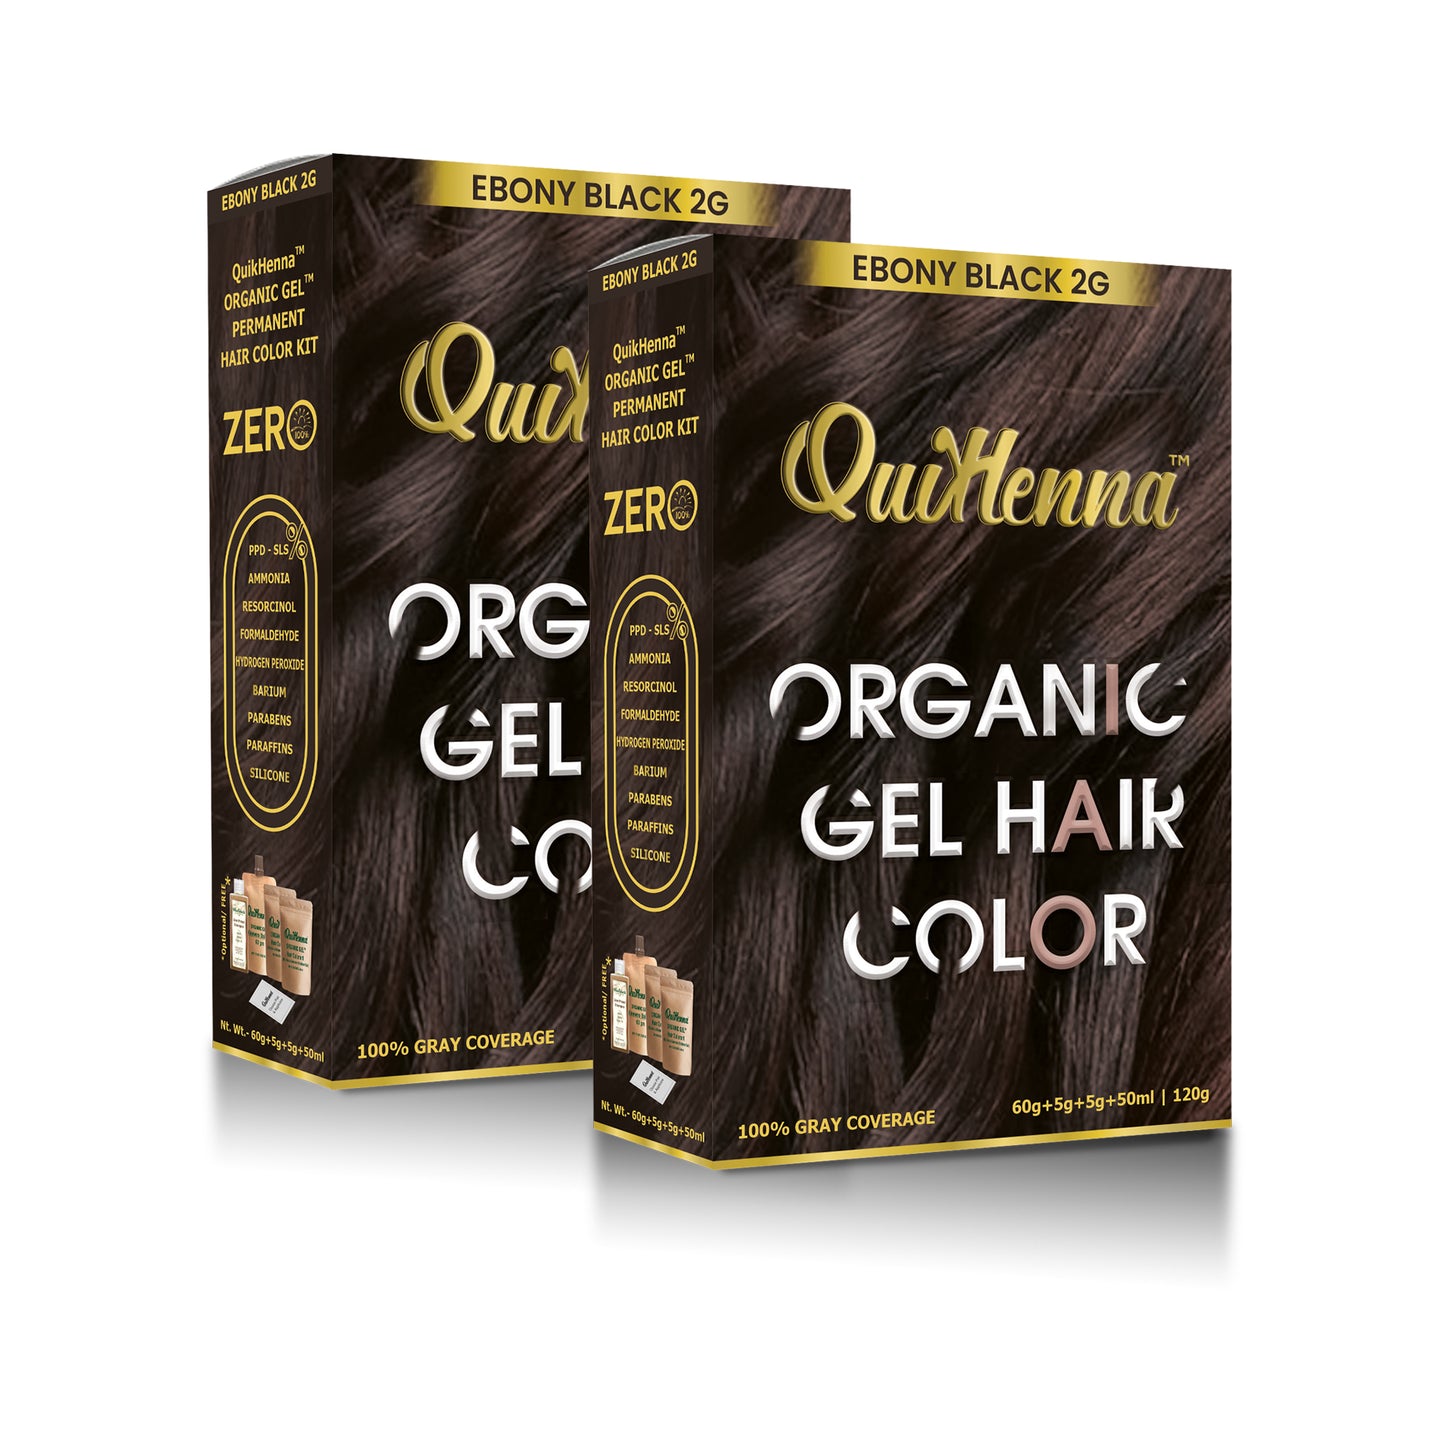 QuikHenna Organic Gel Hair Colour for men and women ebony black ammonia and ppd free color